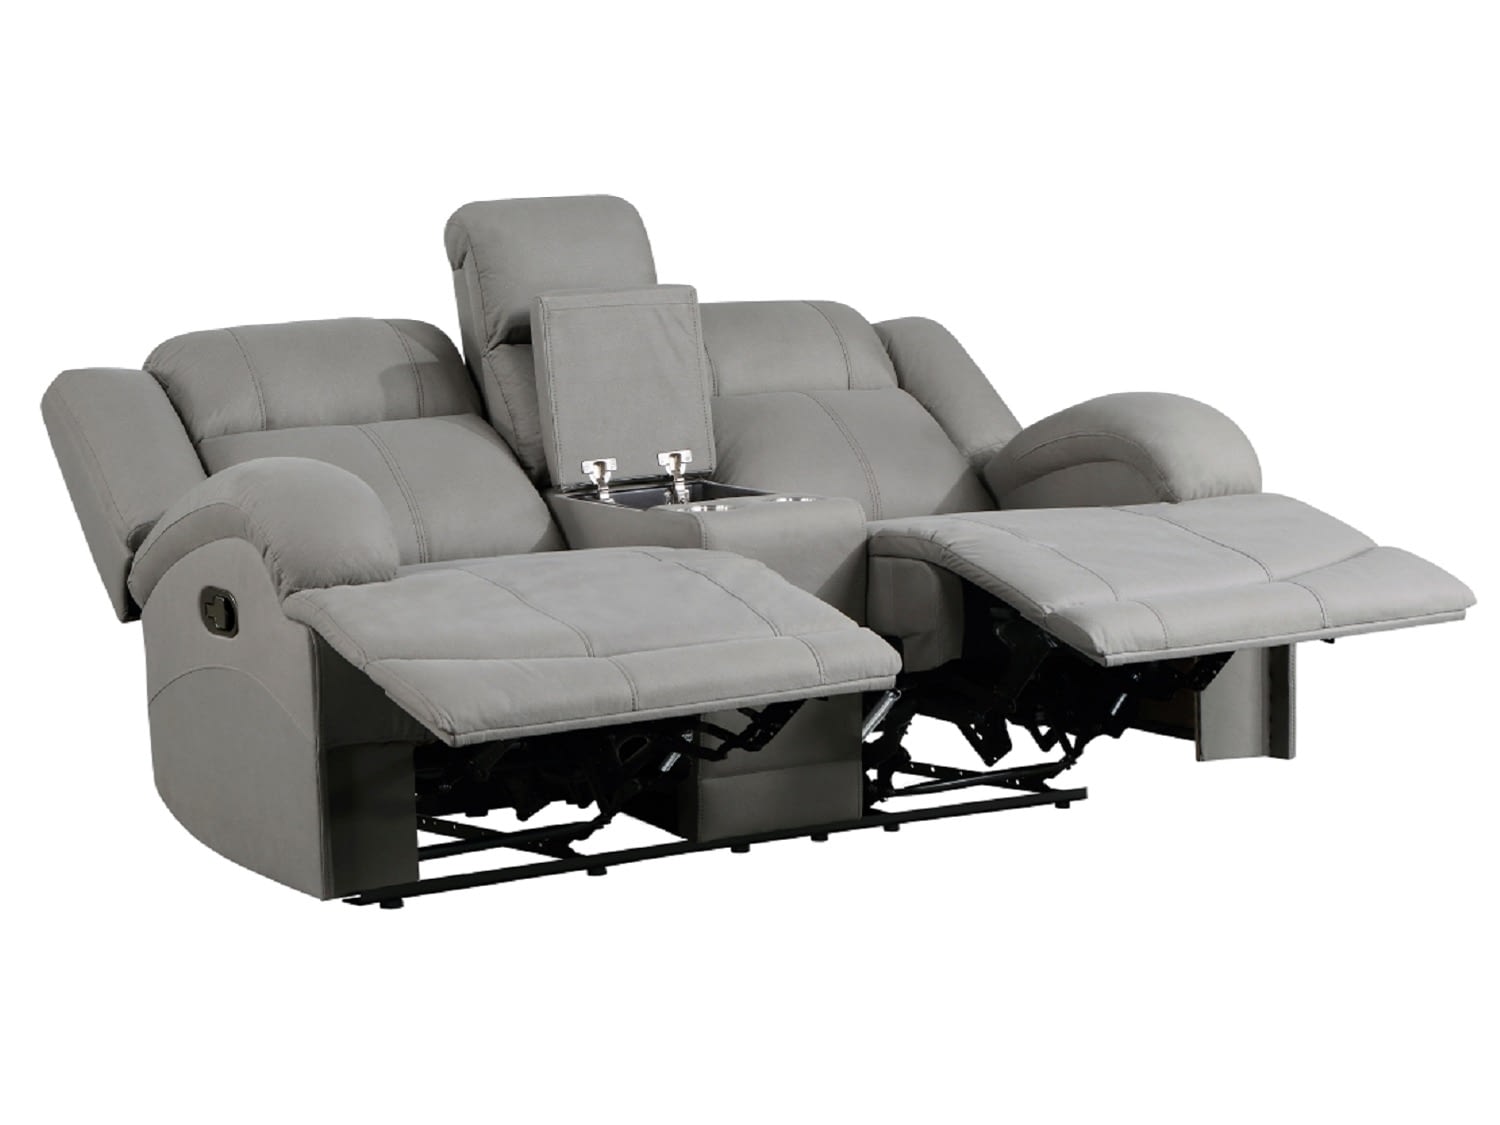 QUINCY Reclining Loveseat with Console -Open